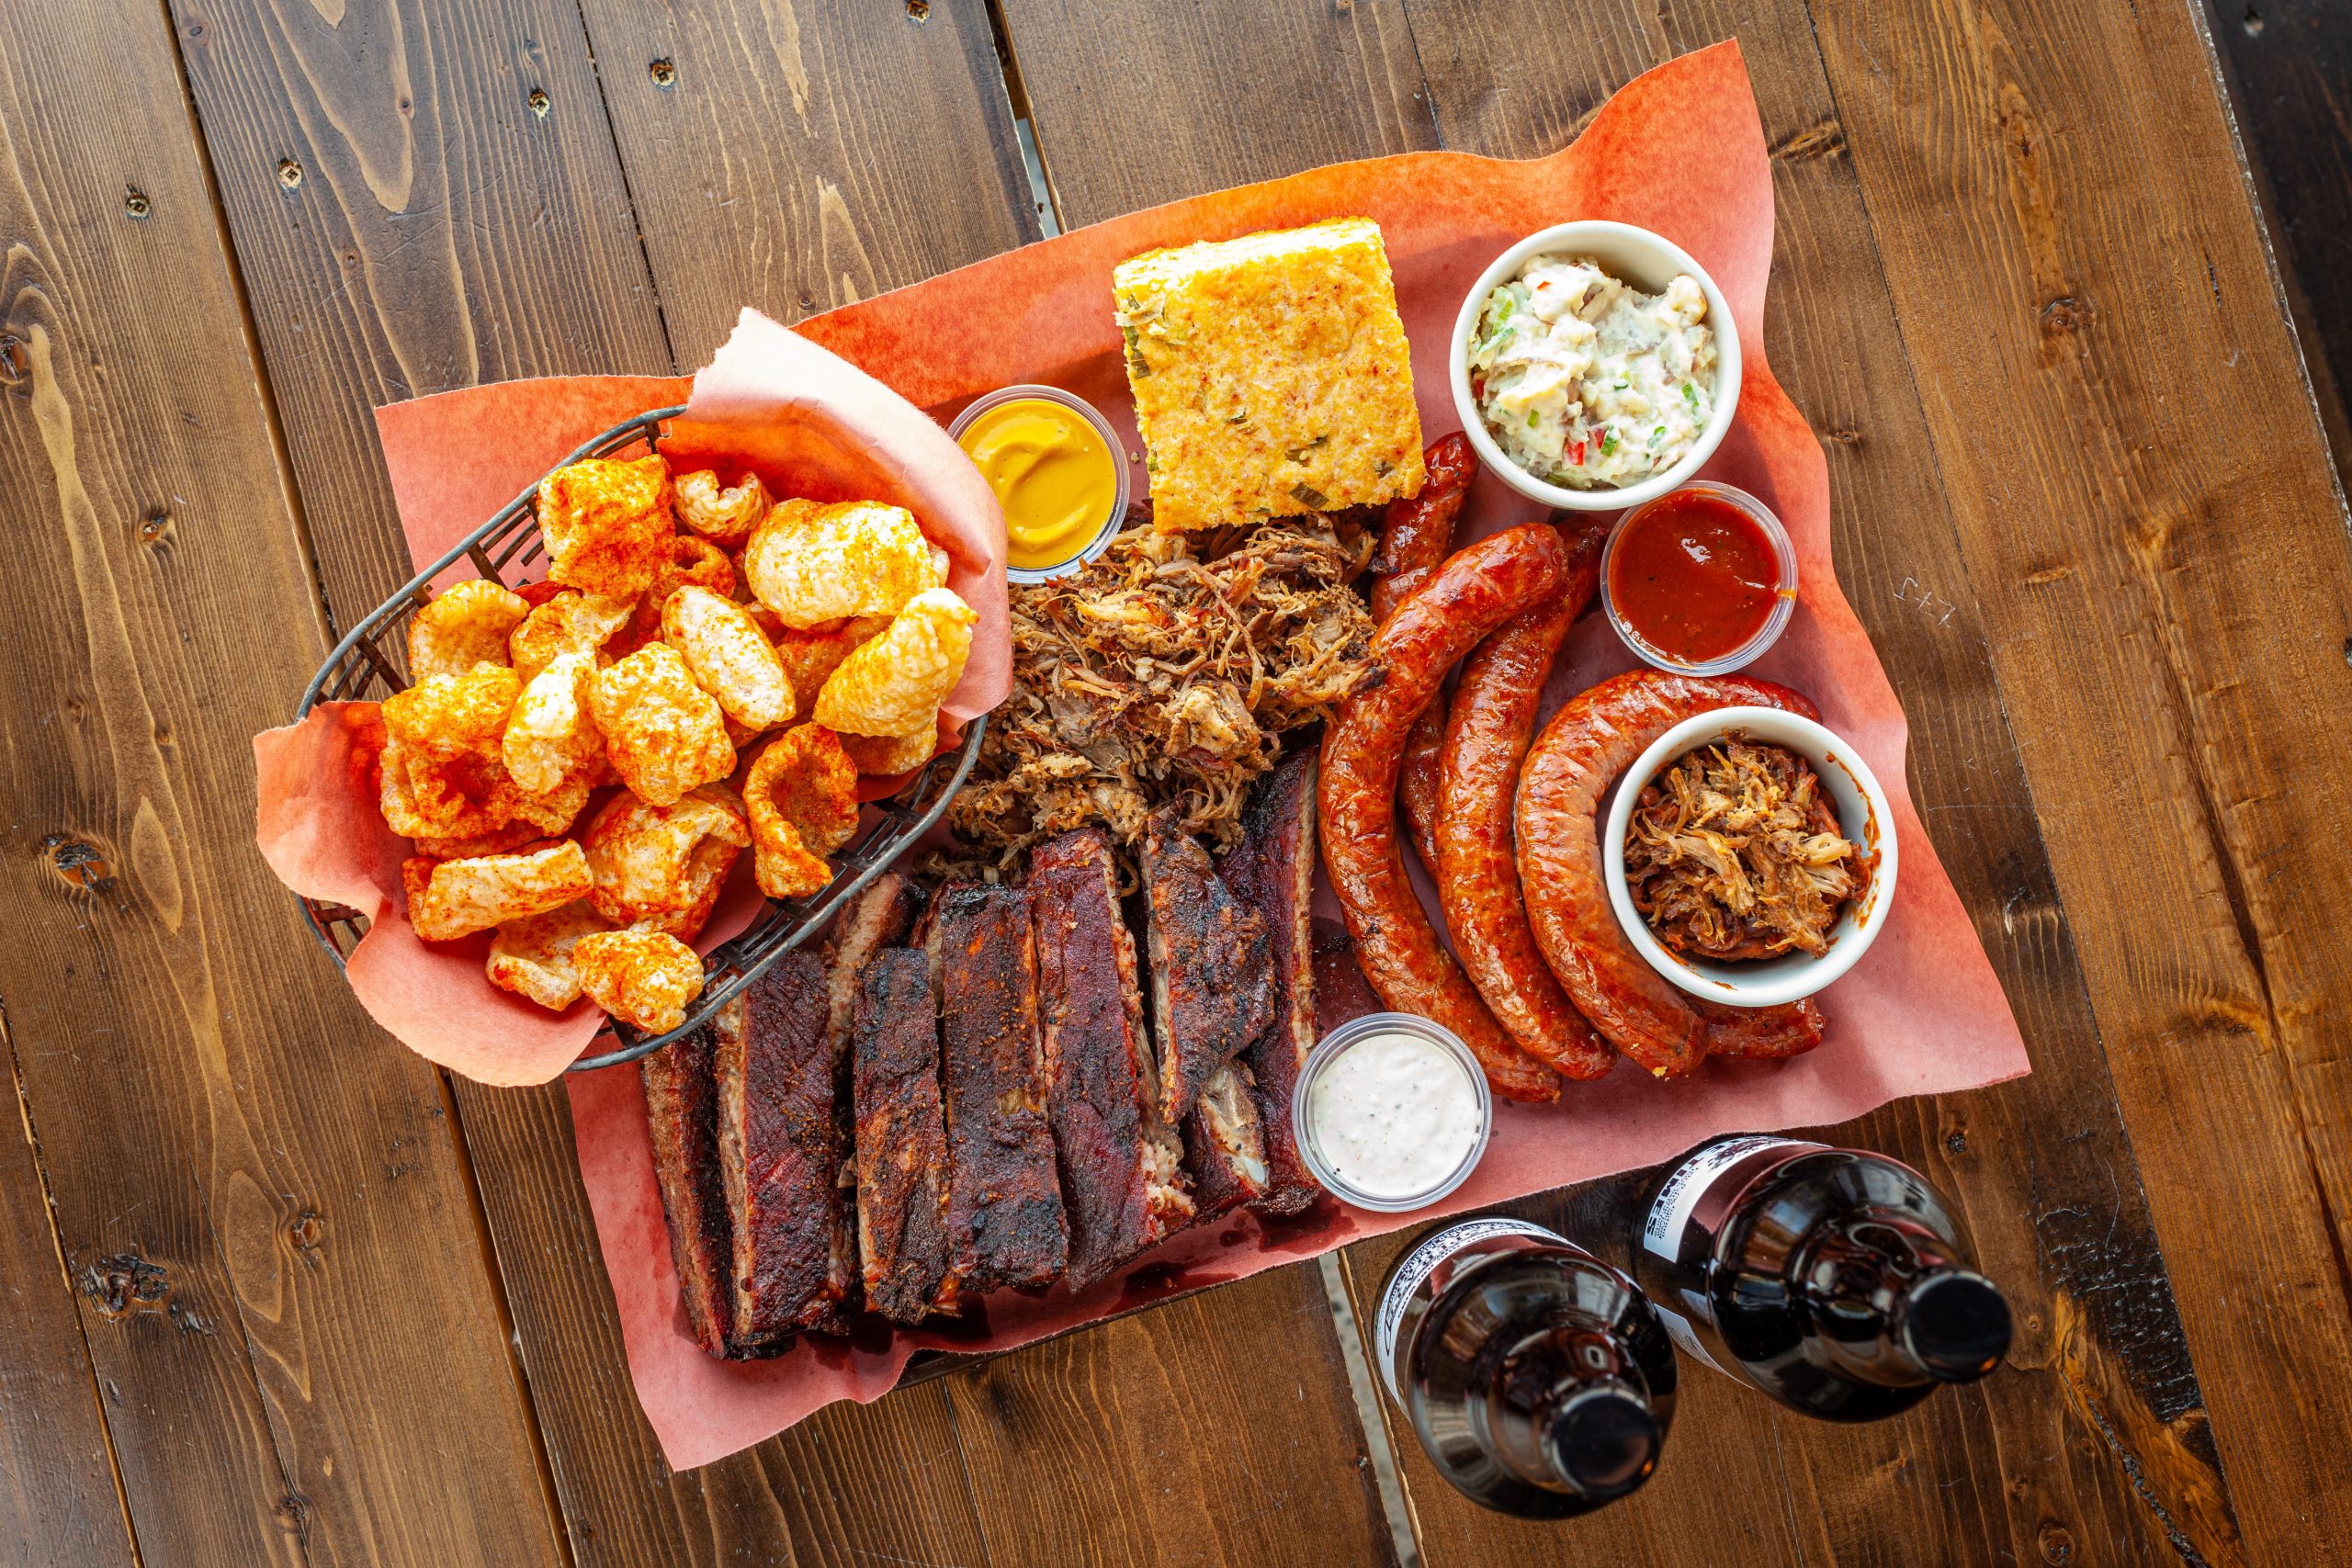 A delicious arrangement of barbecued meats, sides and barbecue sauces on a large tray with butcher paper on a wood table, with two Prairie Dog special release bottled beers.